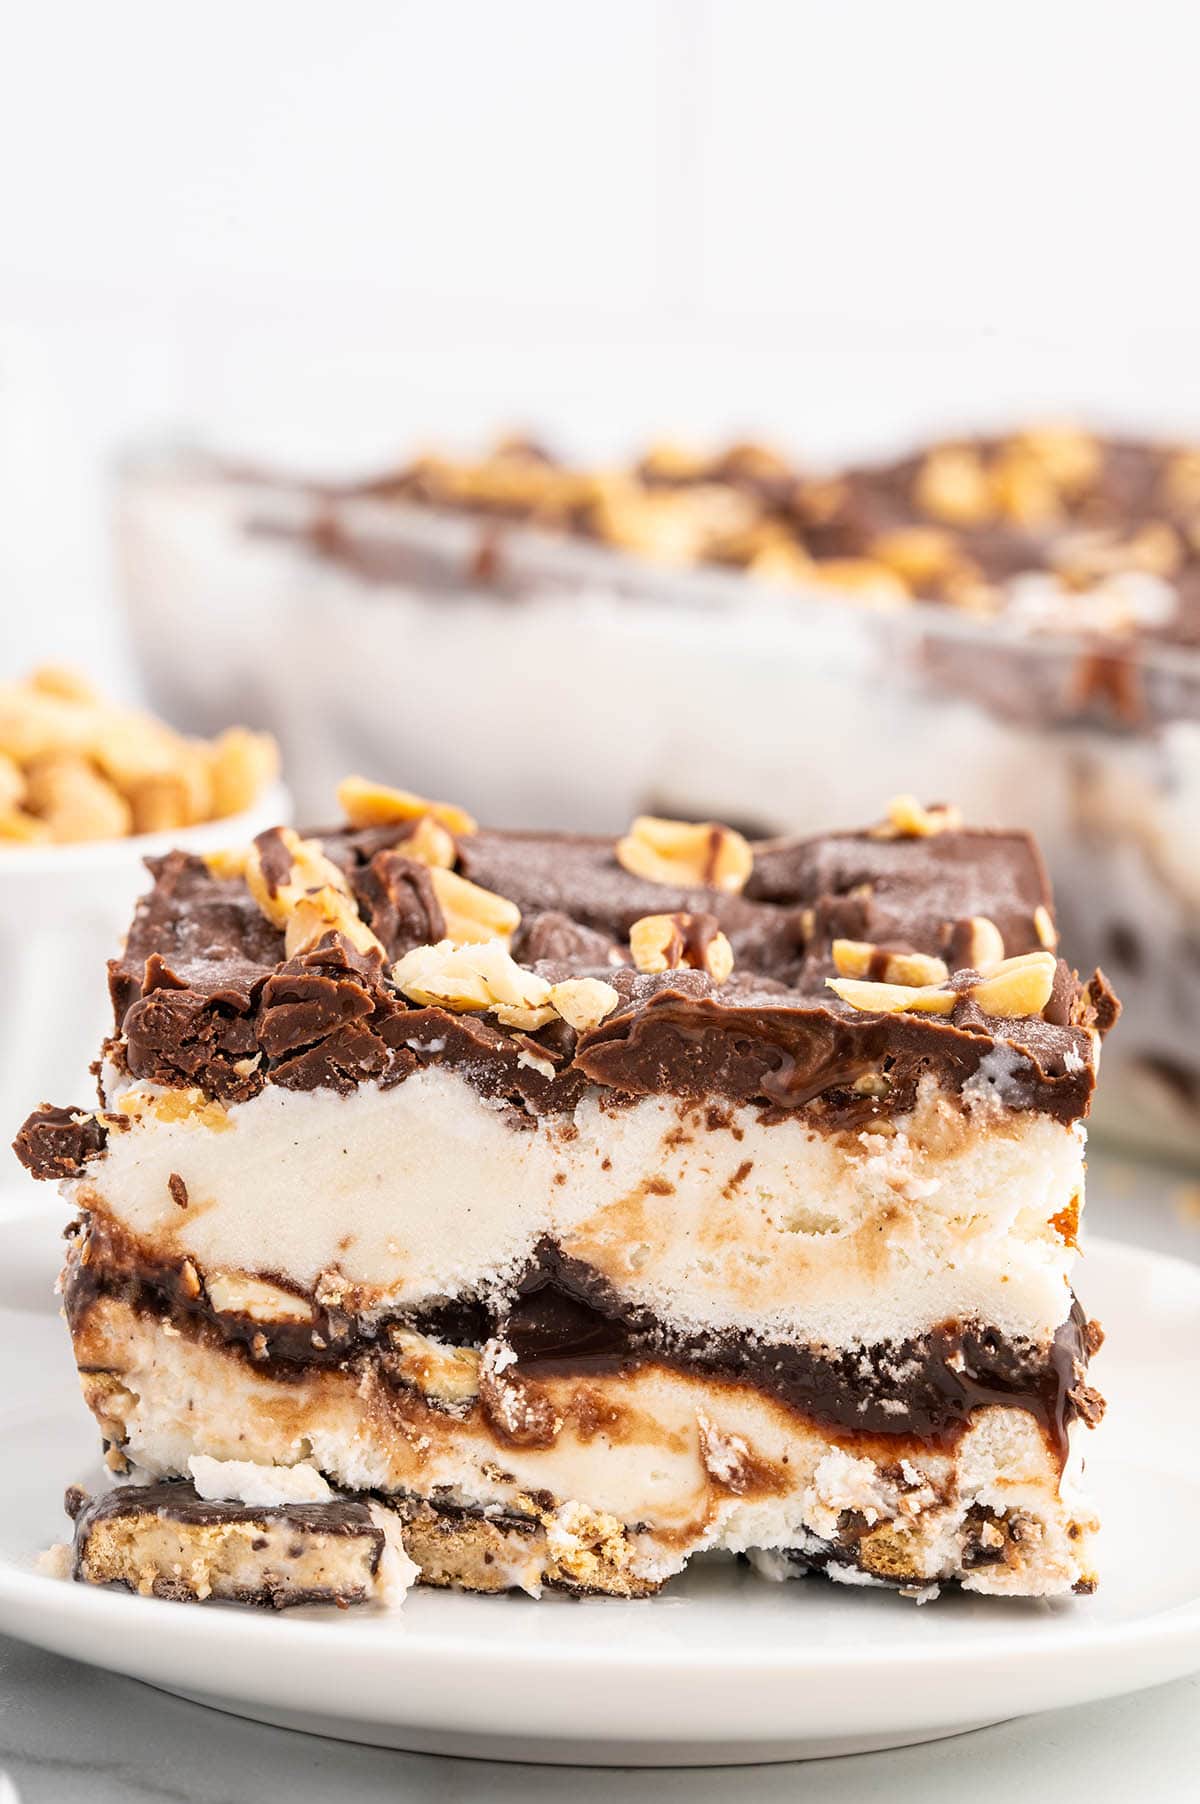 Buster Bar Ice Cream Cake on a plate